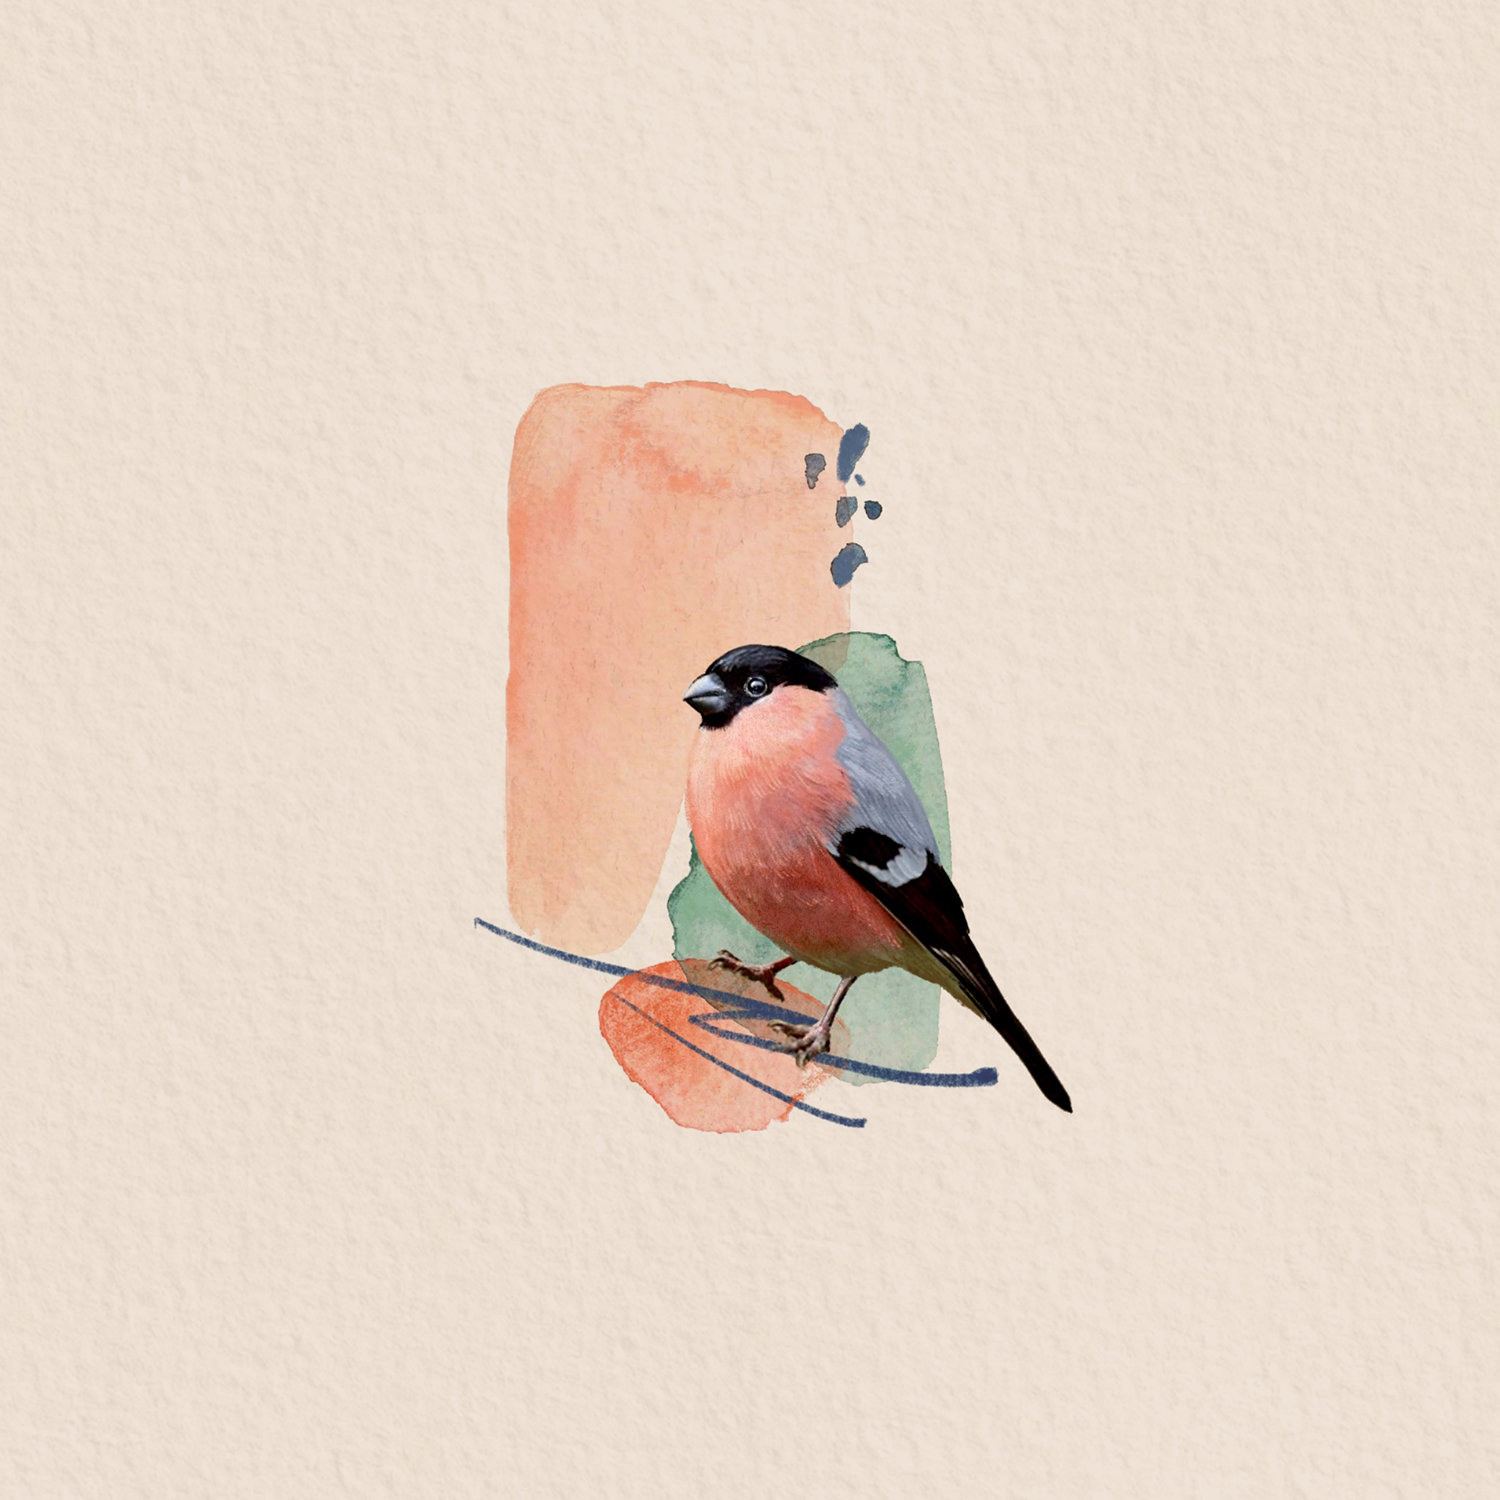 Bullfinch, a concept for the next tattoo.